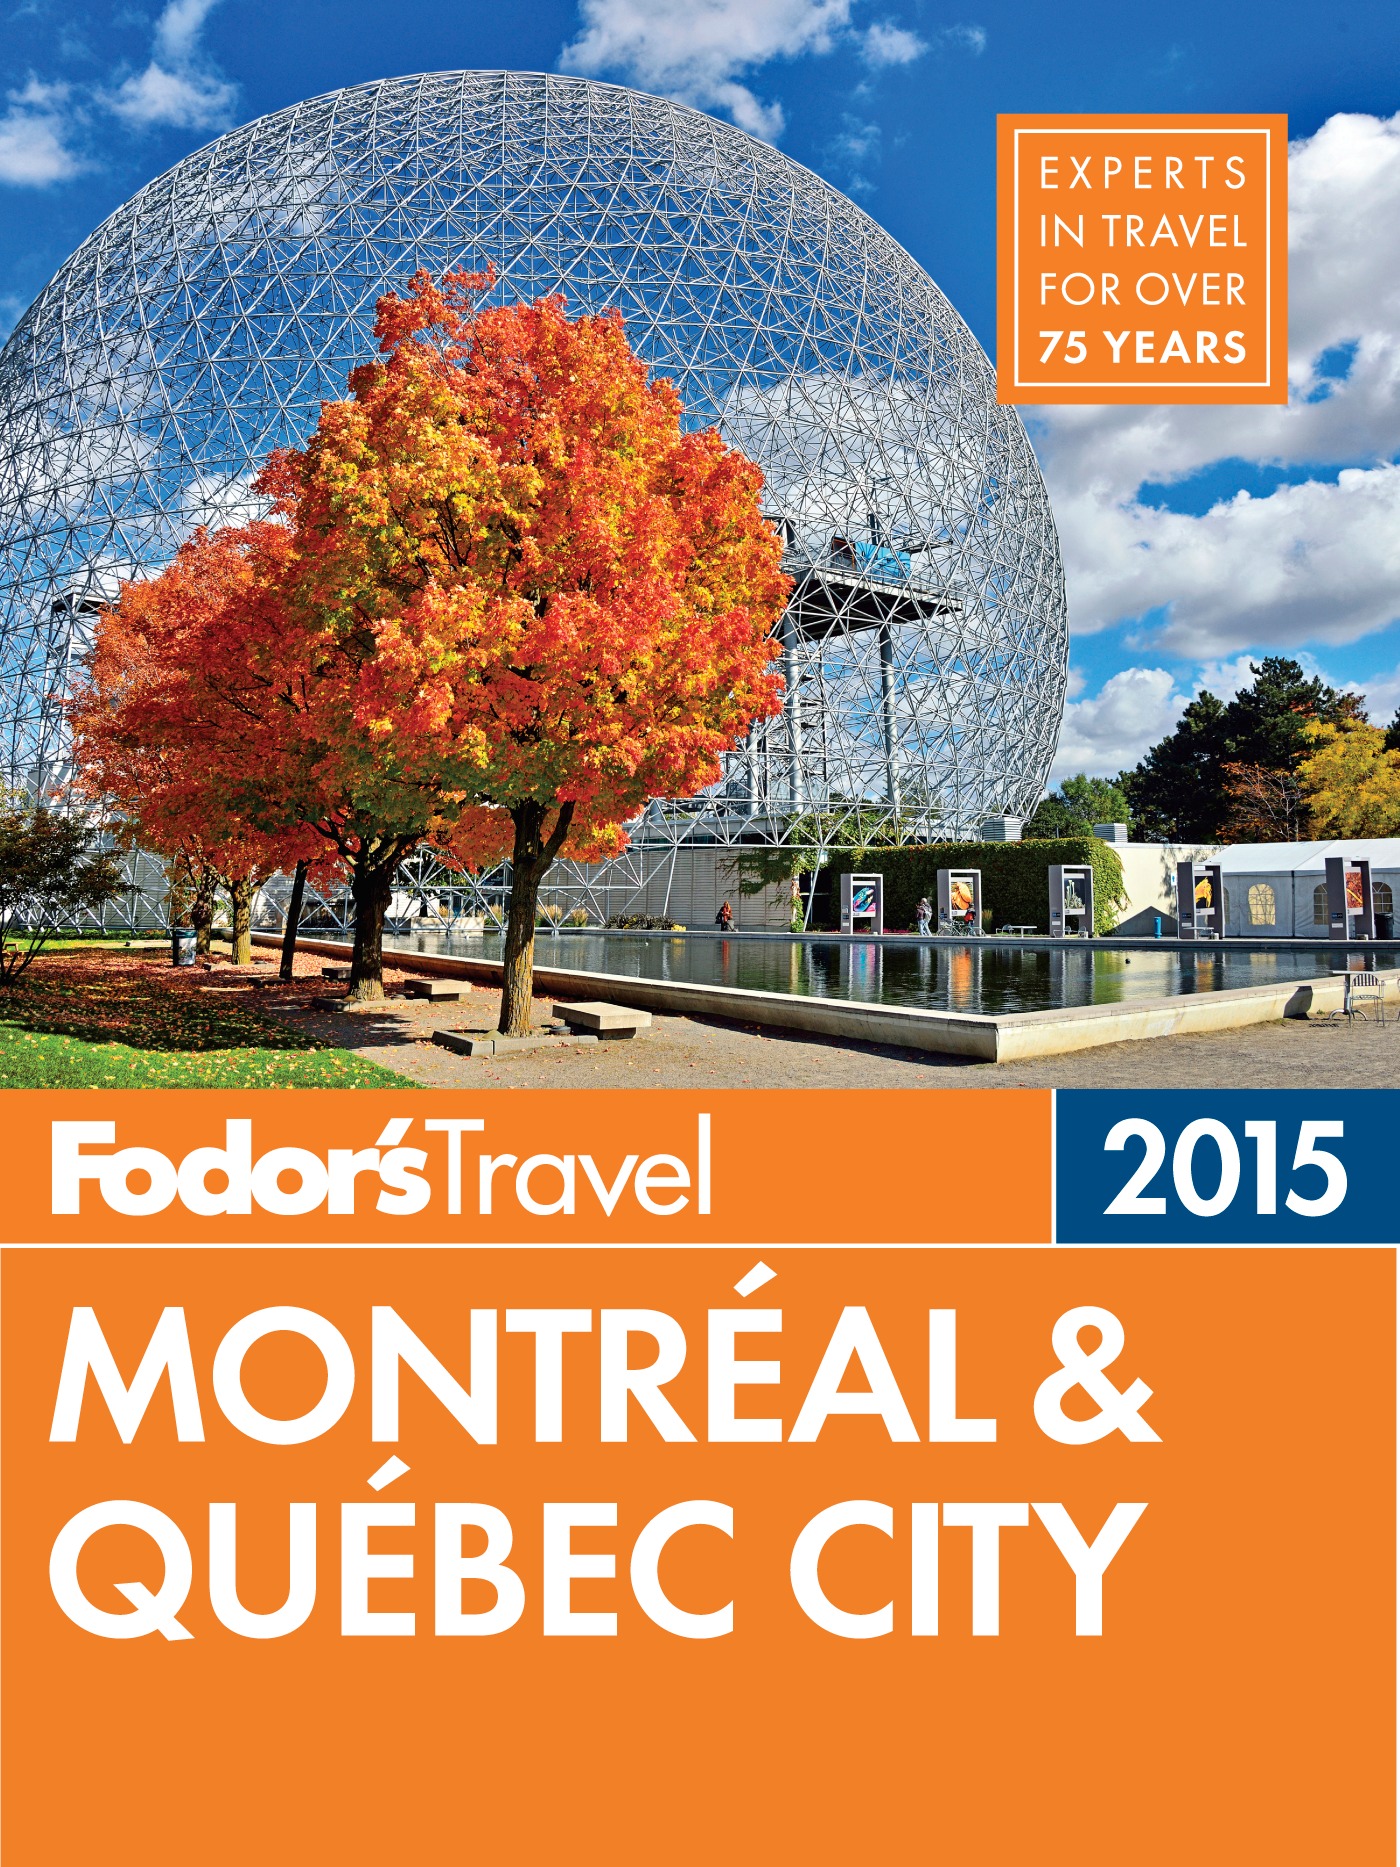 Fodor's Montreal & Quebec City 2015 cover image